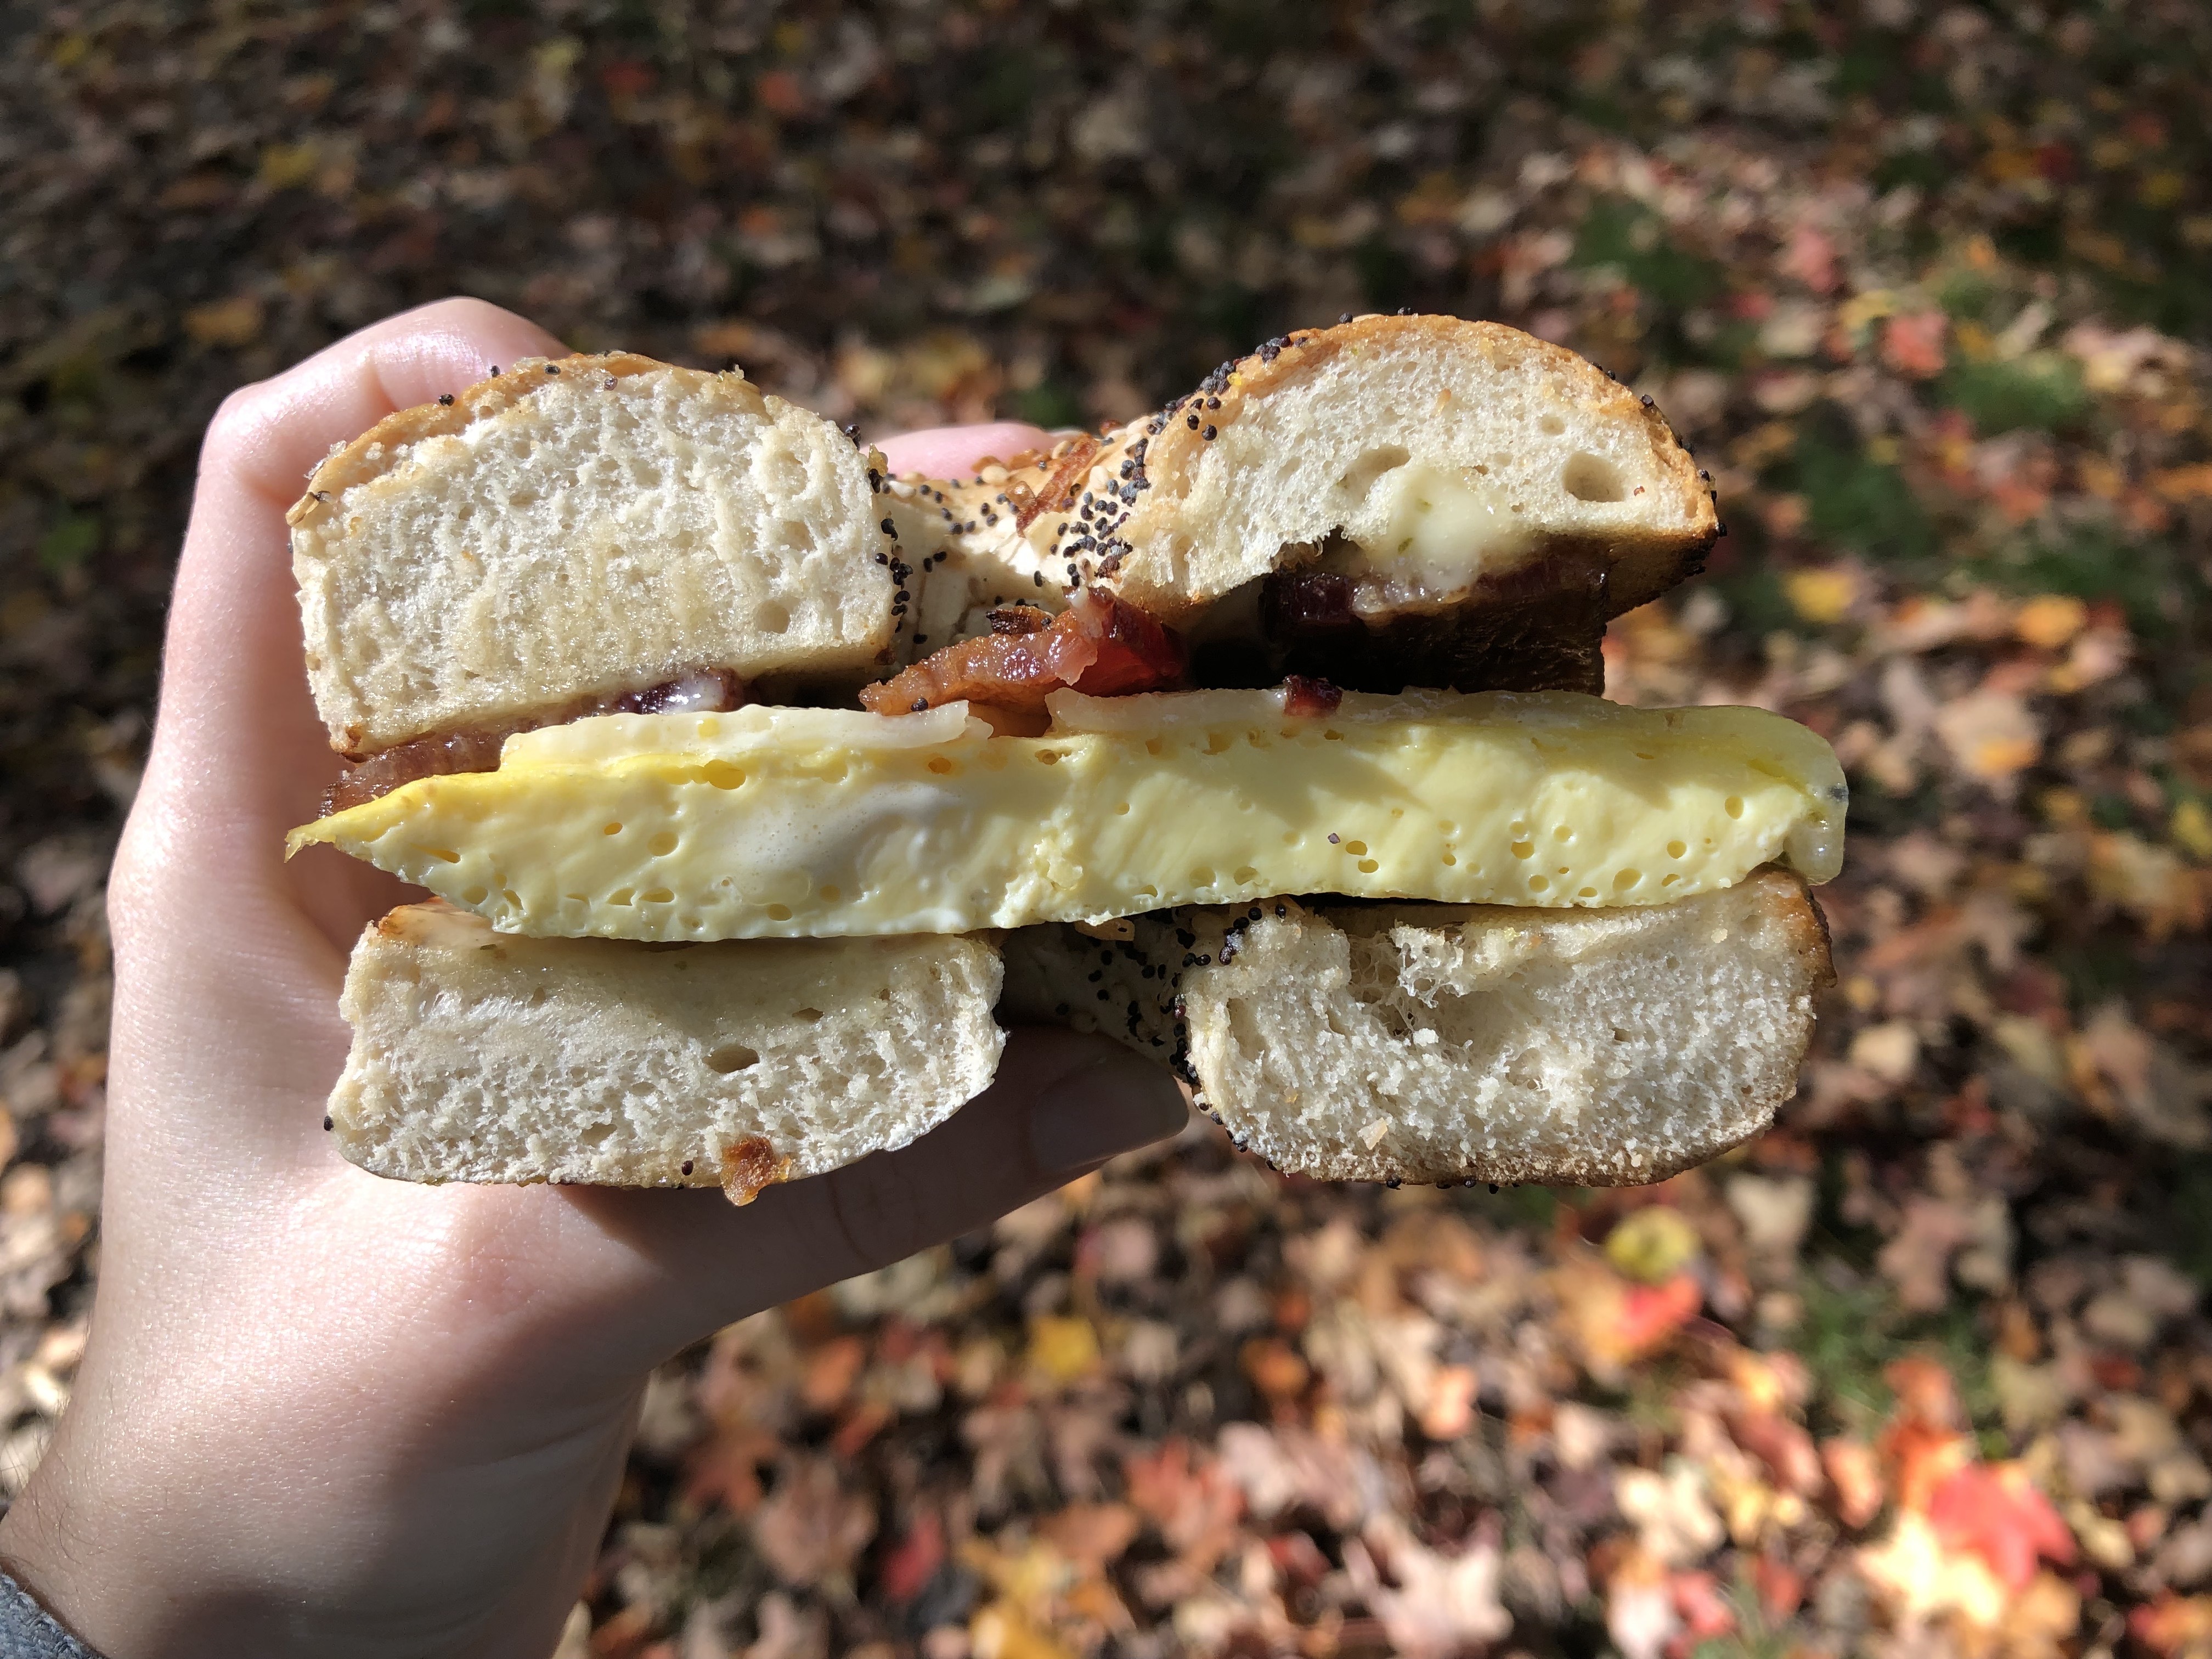 A hand holds one half of a bagel breakfast sandwich with egg and bacon visible.